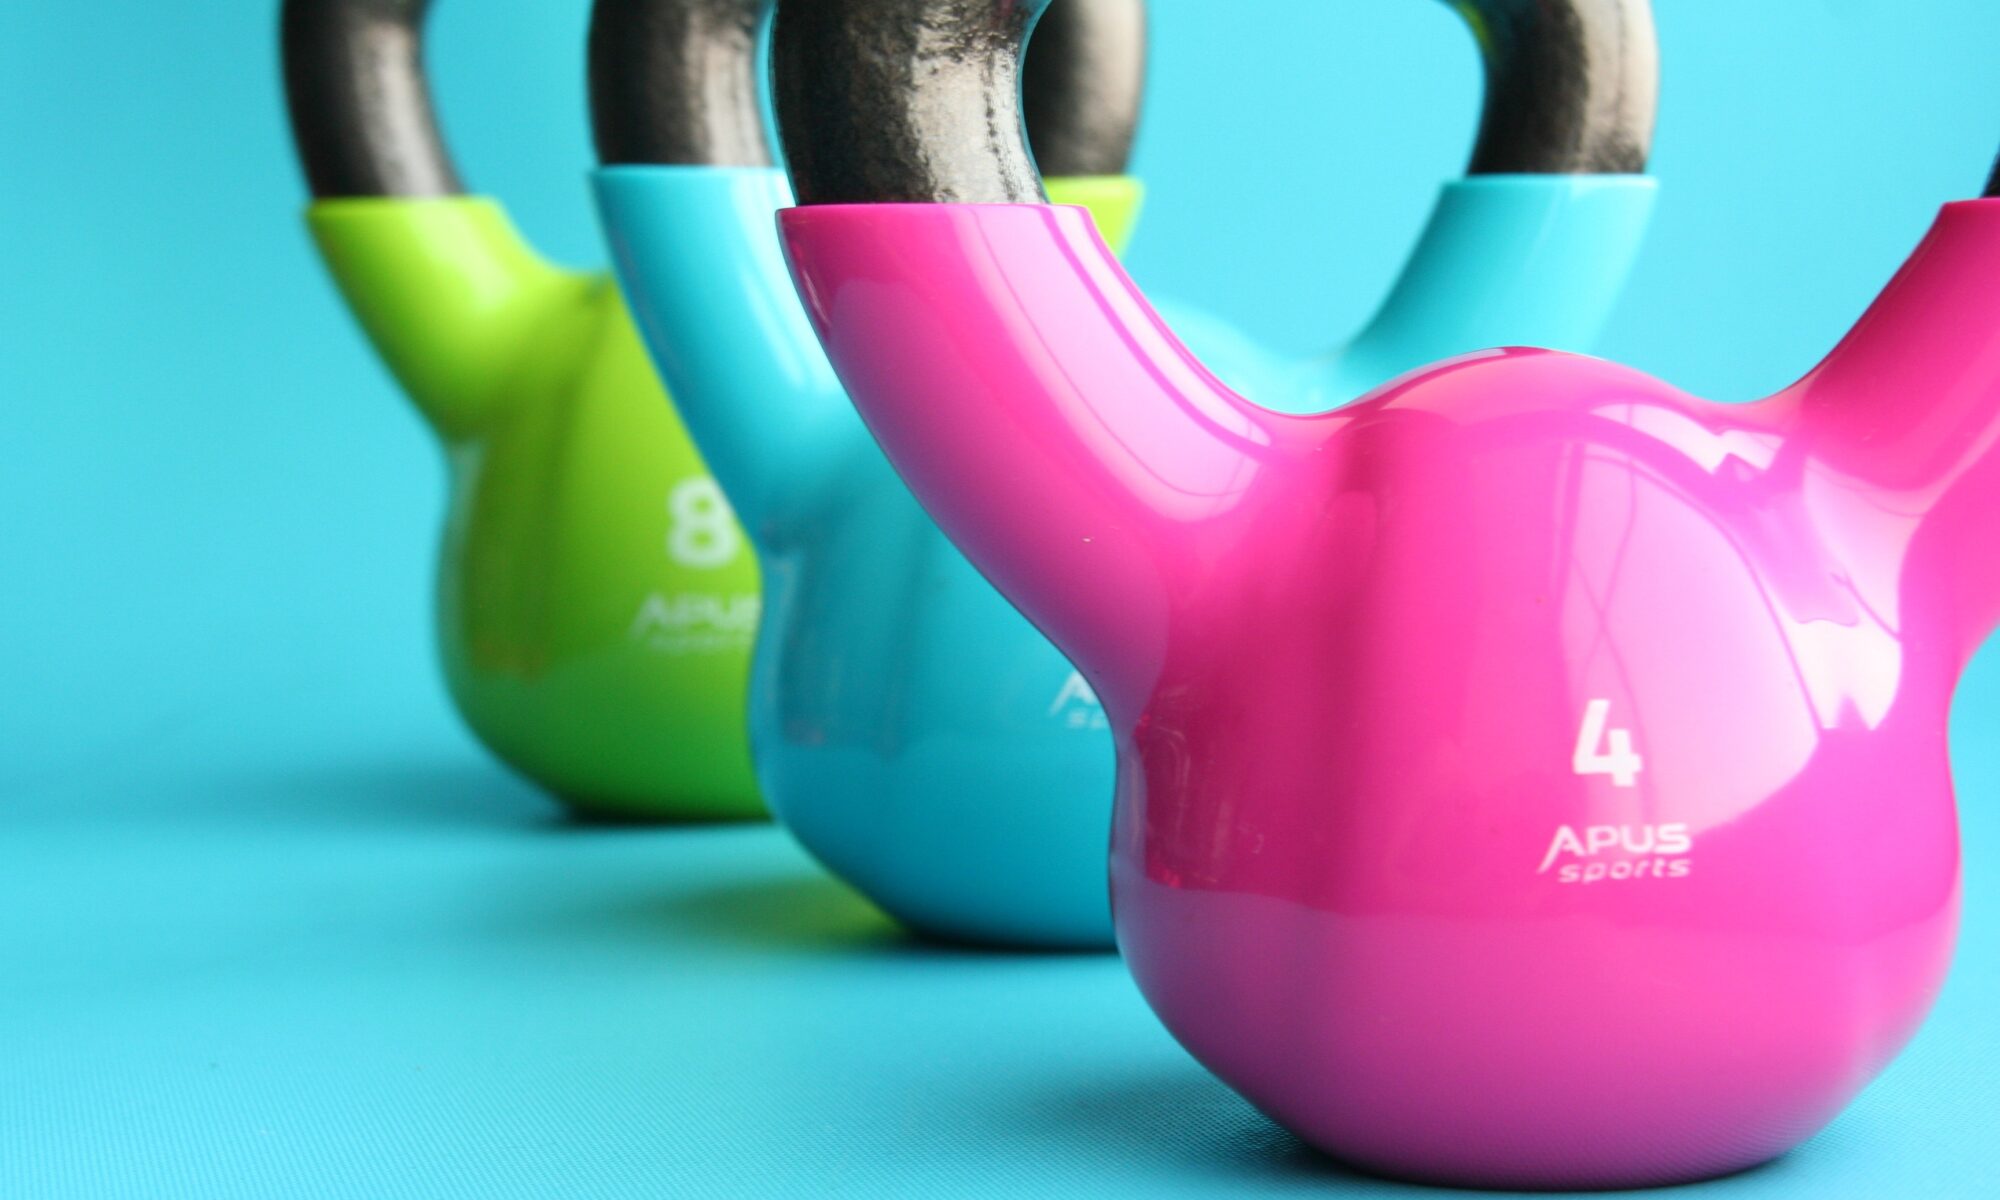 Green, blue, and pink kettle bells